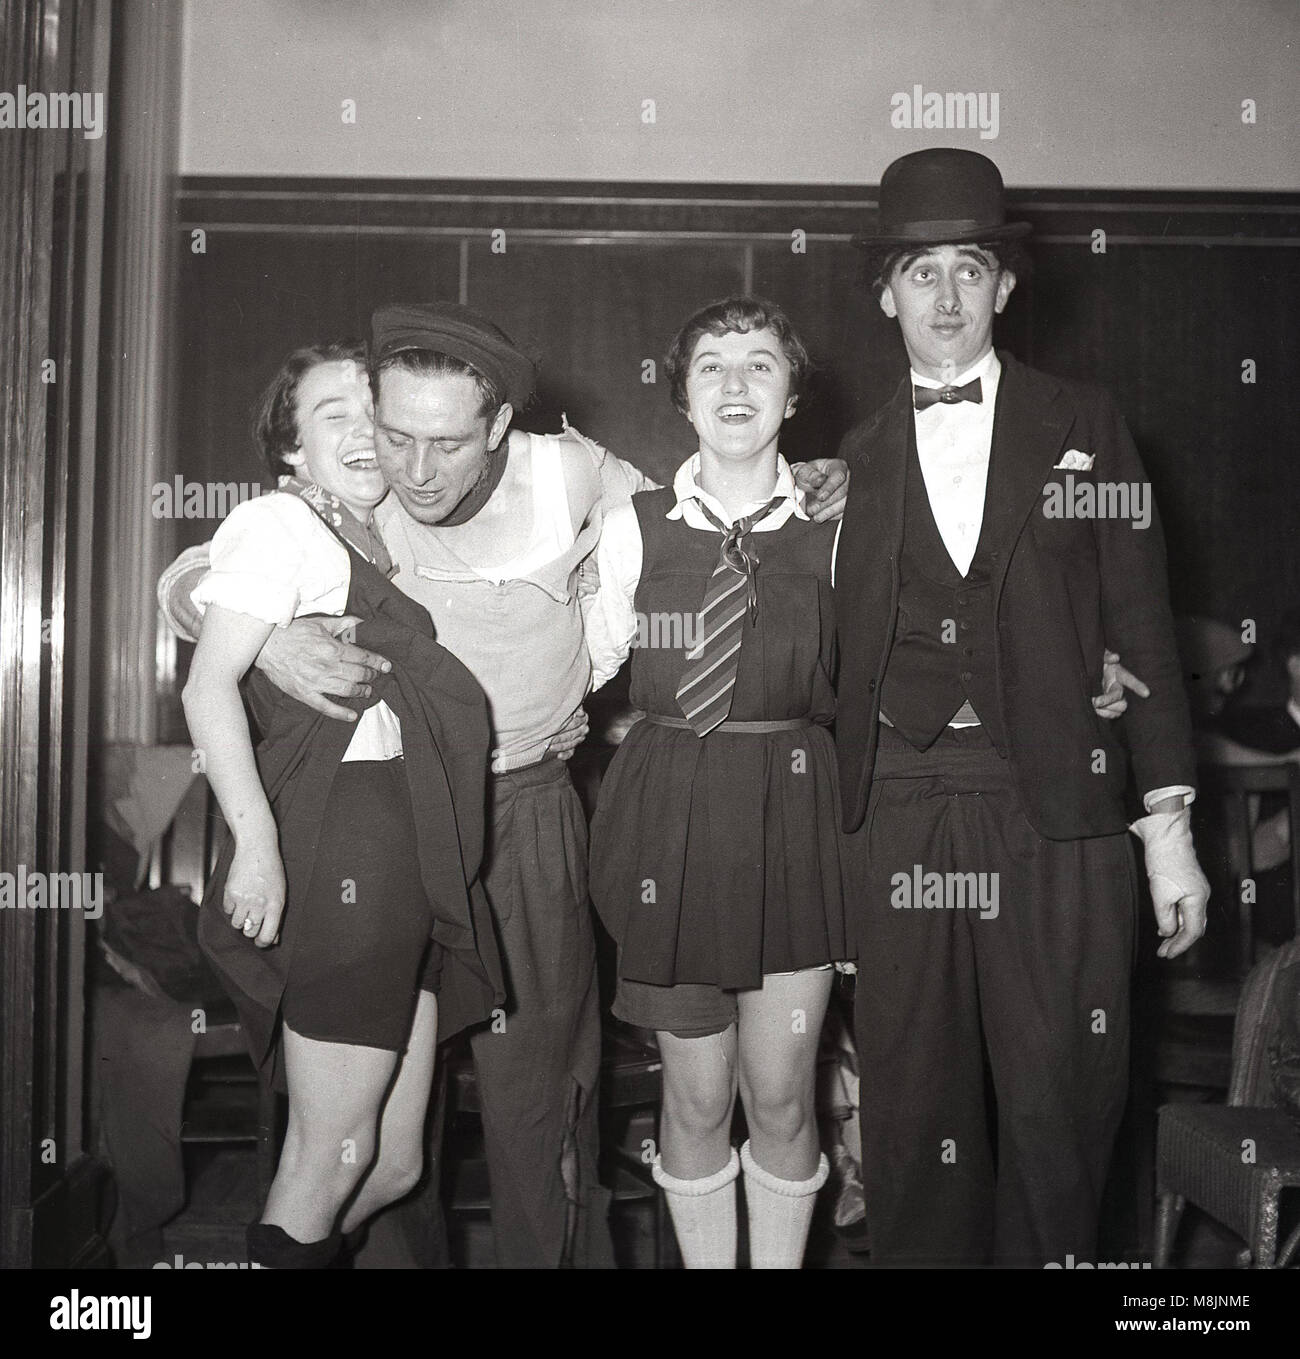 1950s, historical, people at a party wearing fancy dress outfits ot costumes, England, UK. Stock Photo